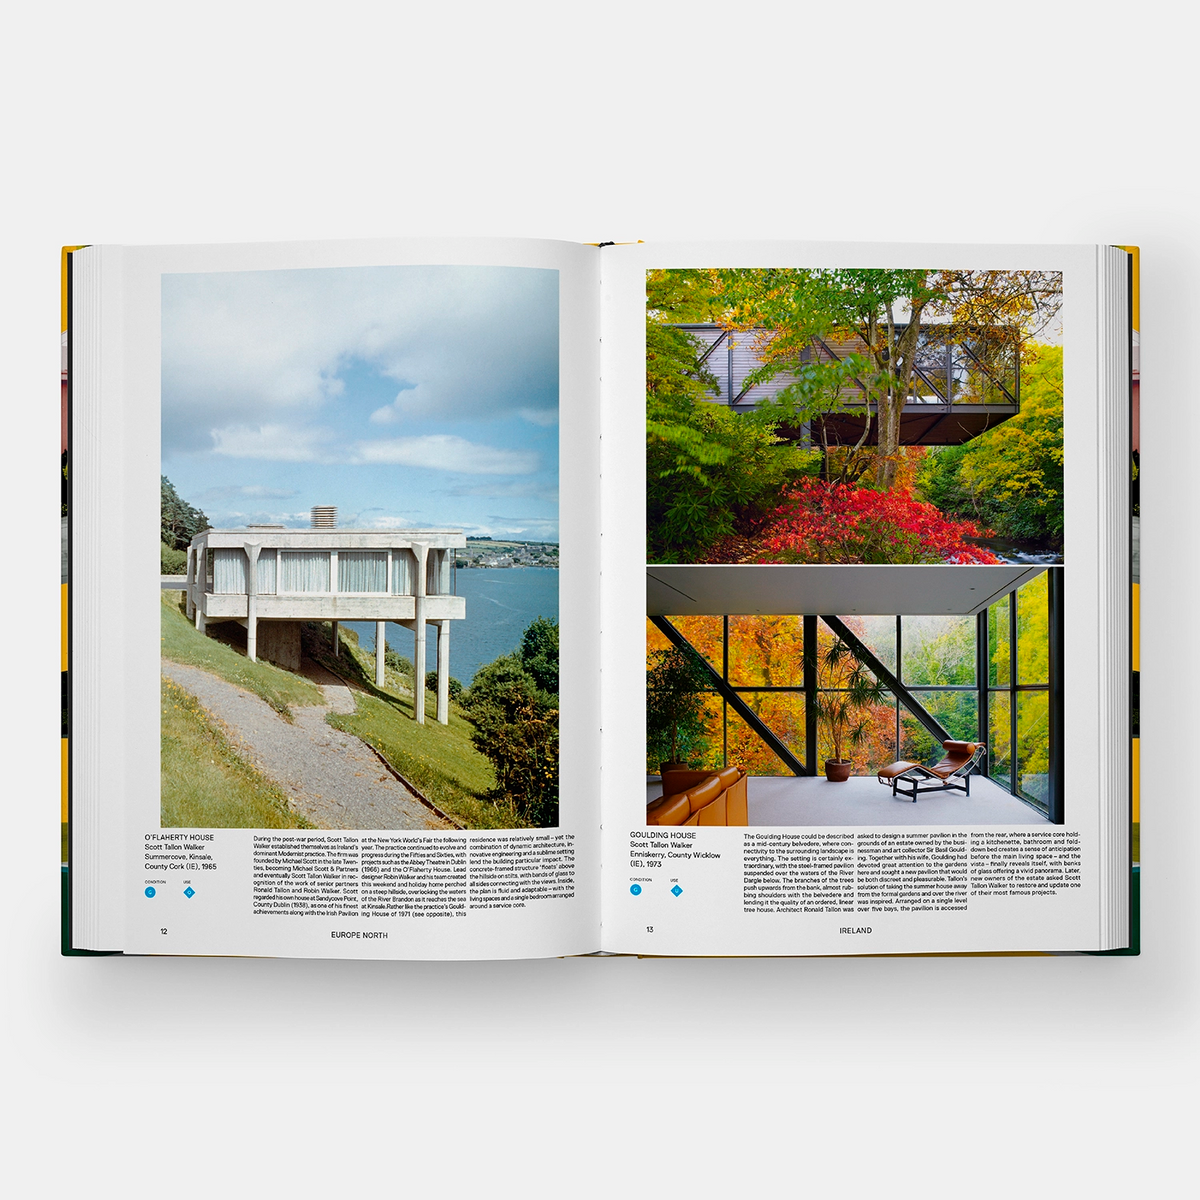 The exterior and interiors of elevated homes on hills in Atlas of Mid-Century Modern Houses.